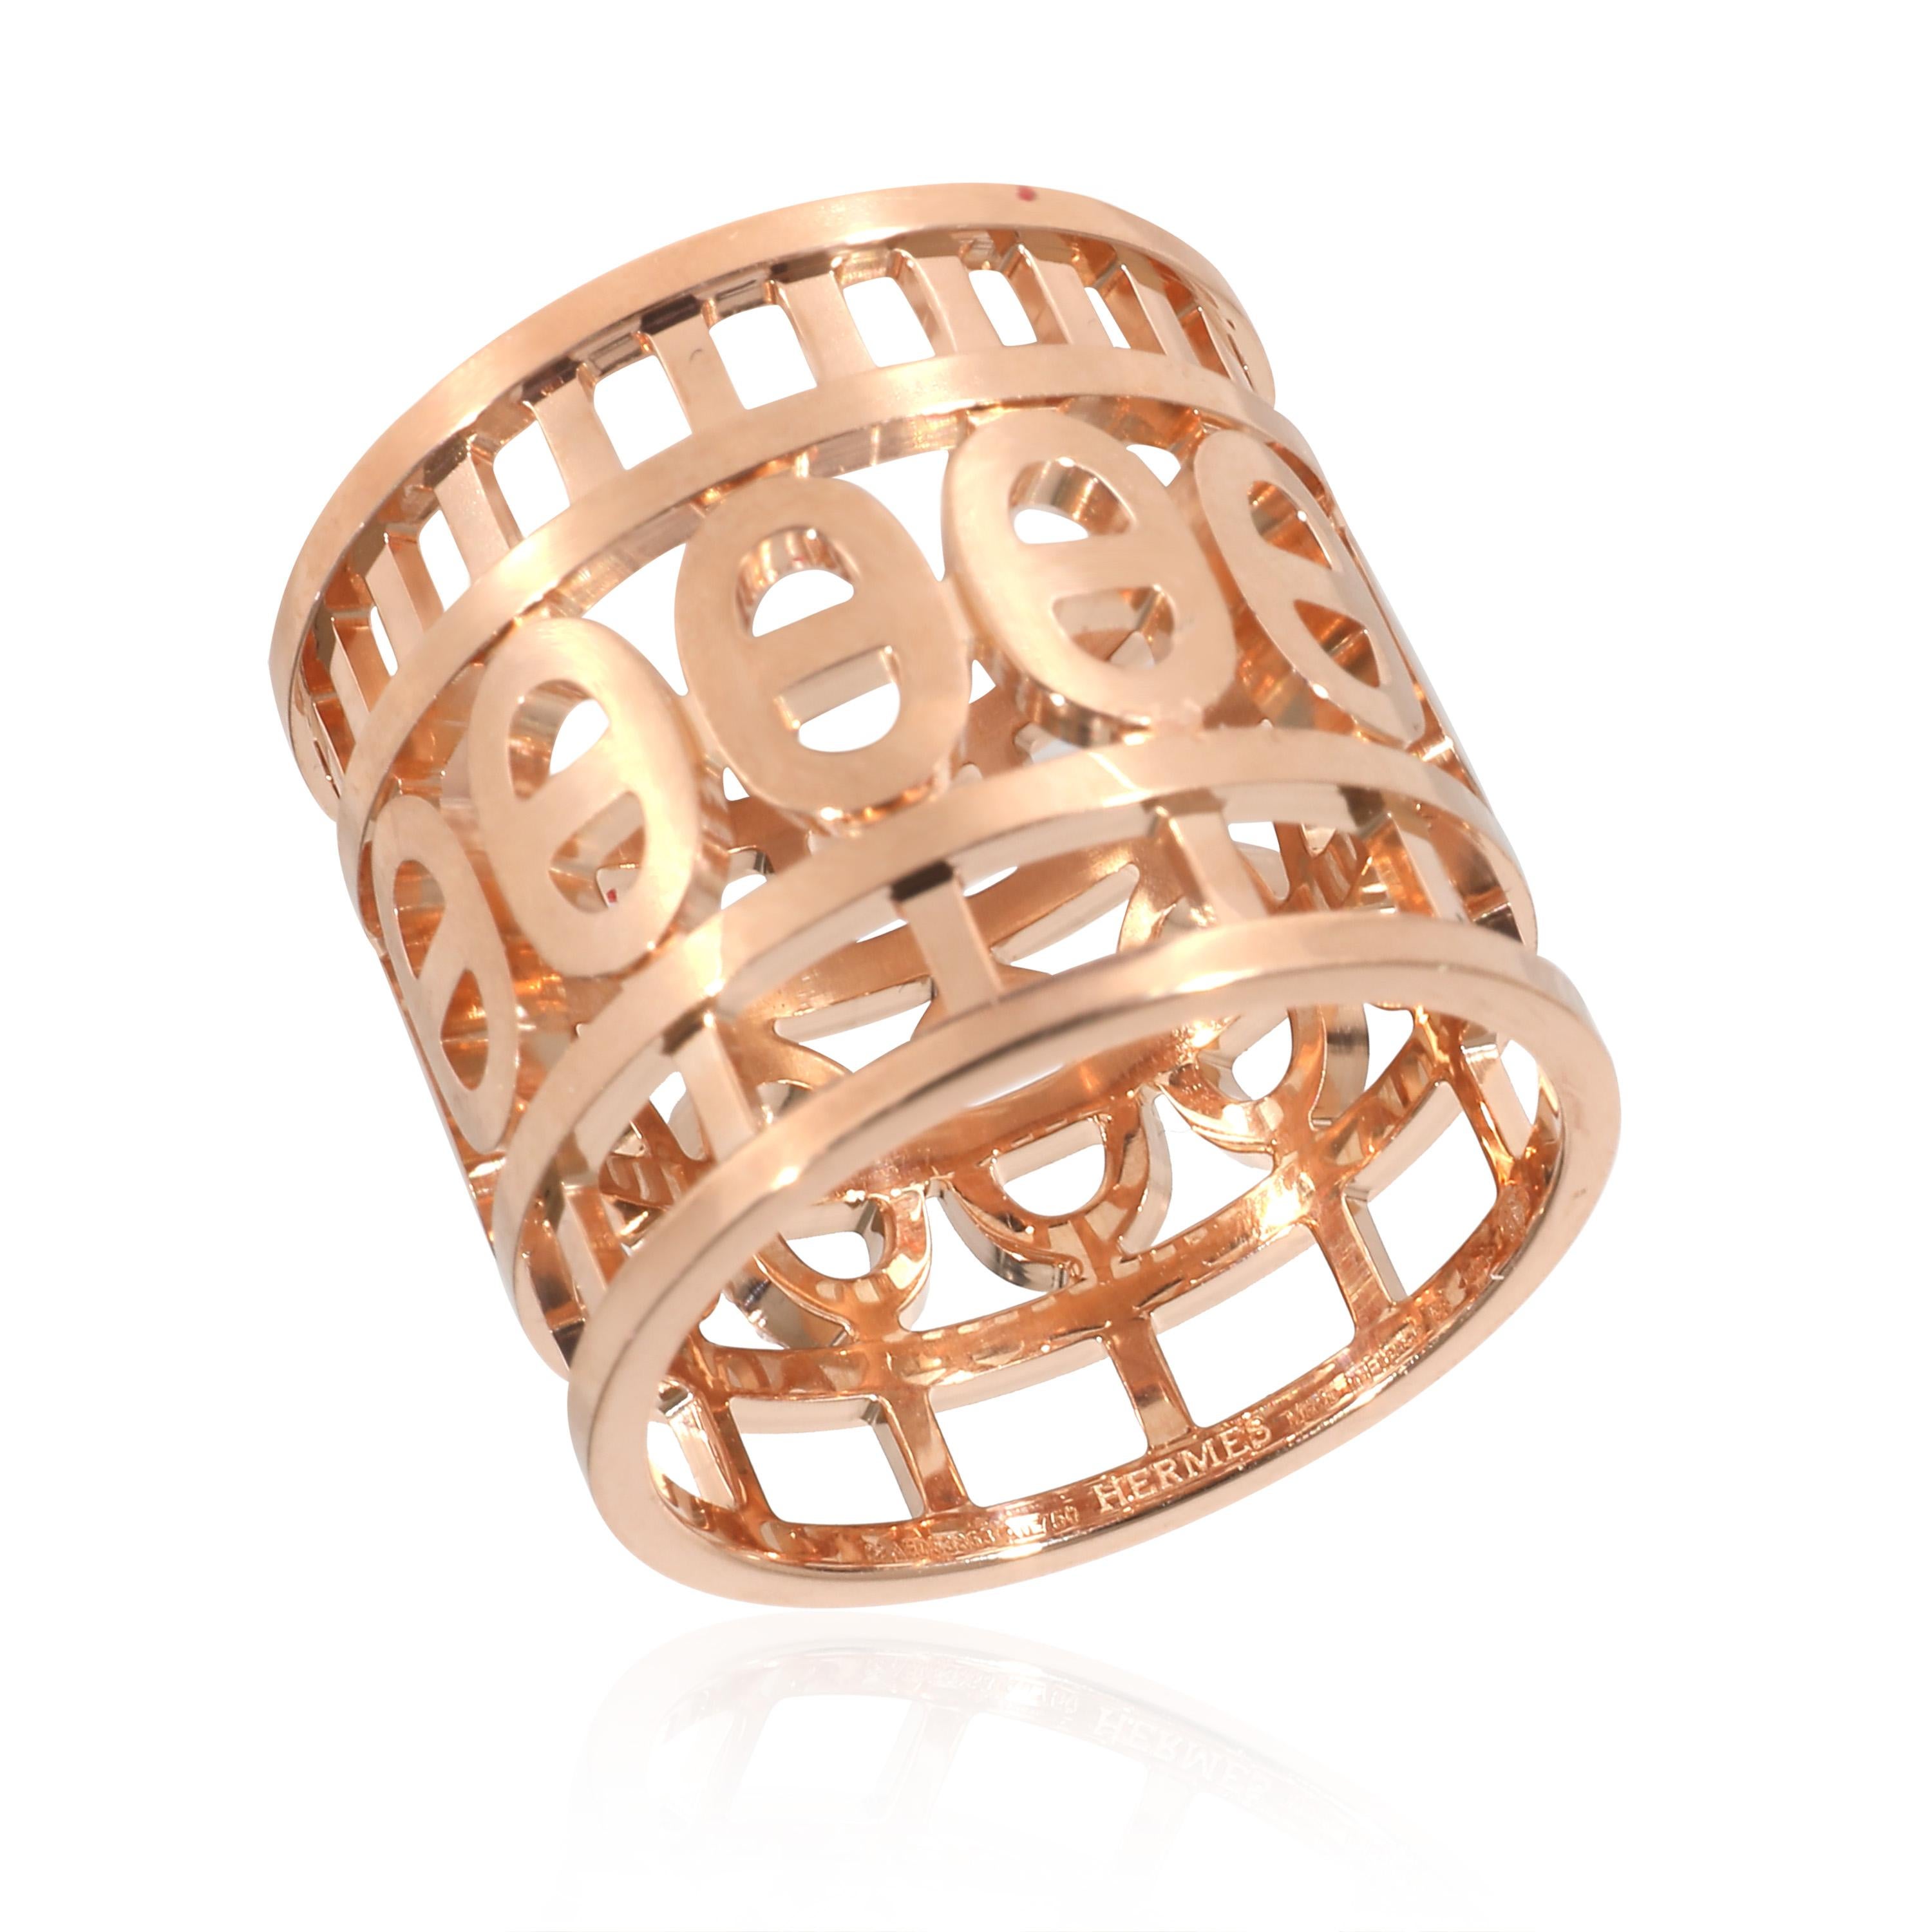 Hermès Chaine D'Ancre Ring in 18K Rose Gold In Excellent Condition For Sale In New York, NY